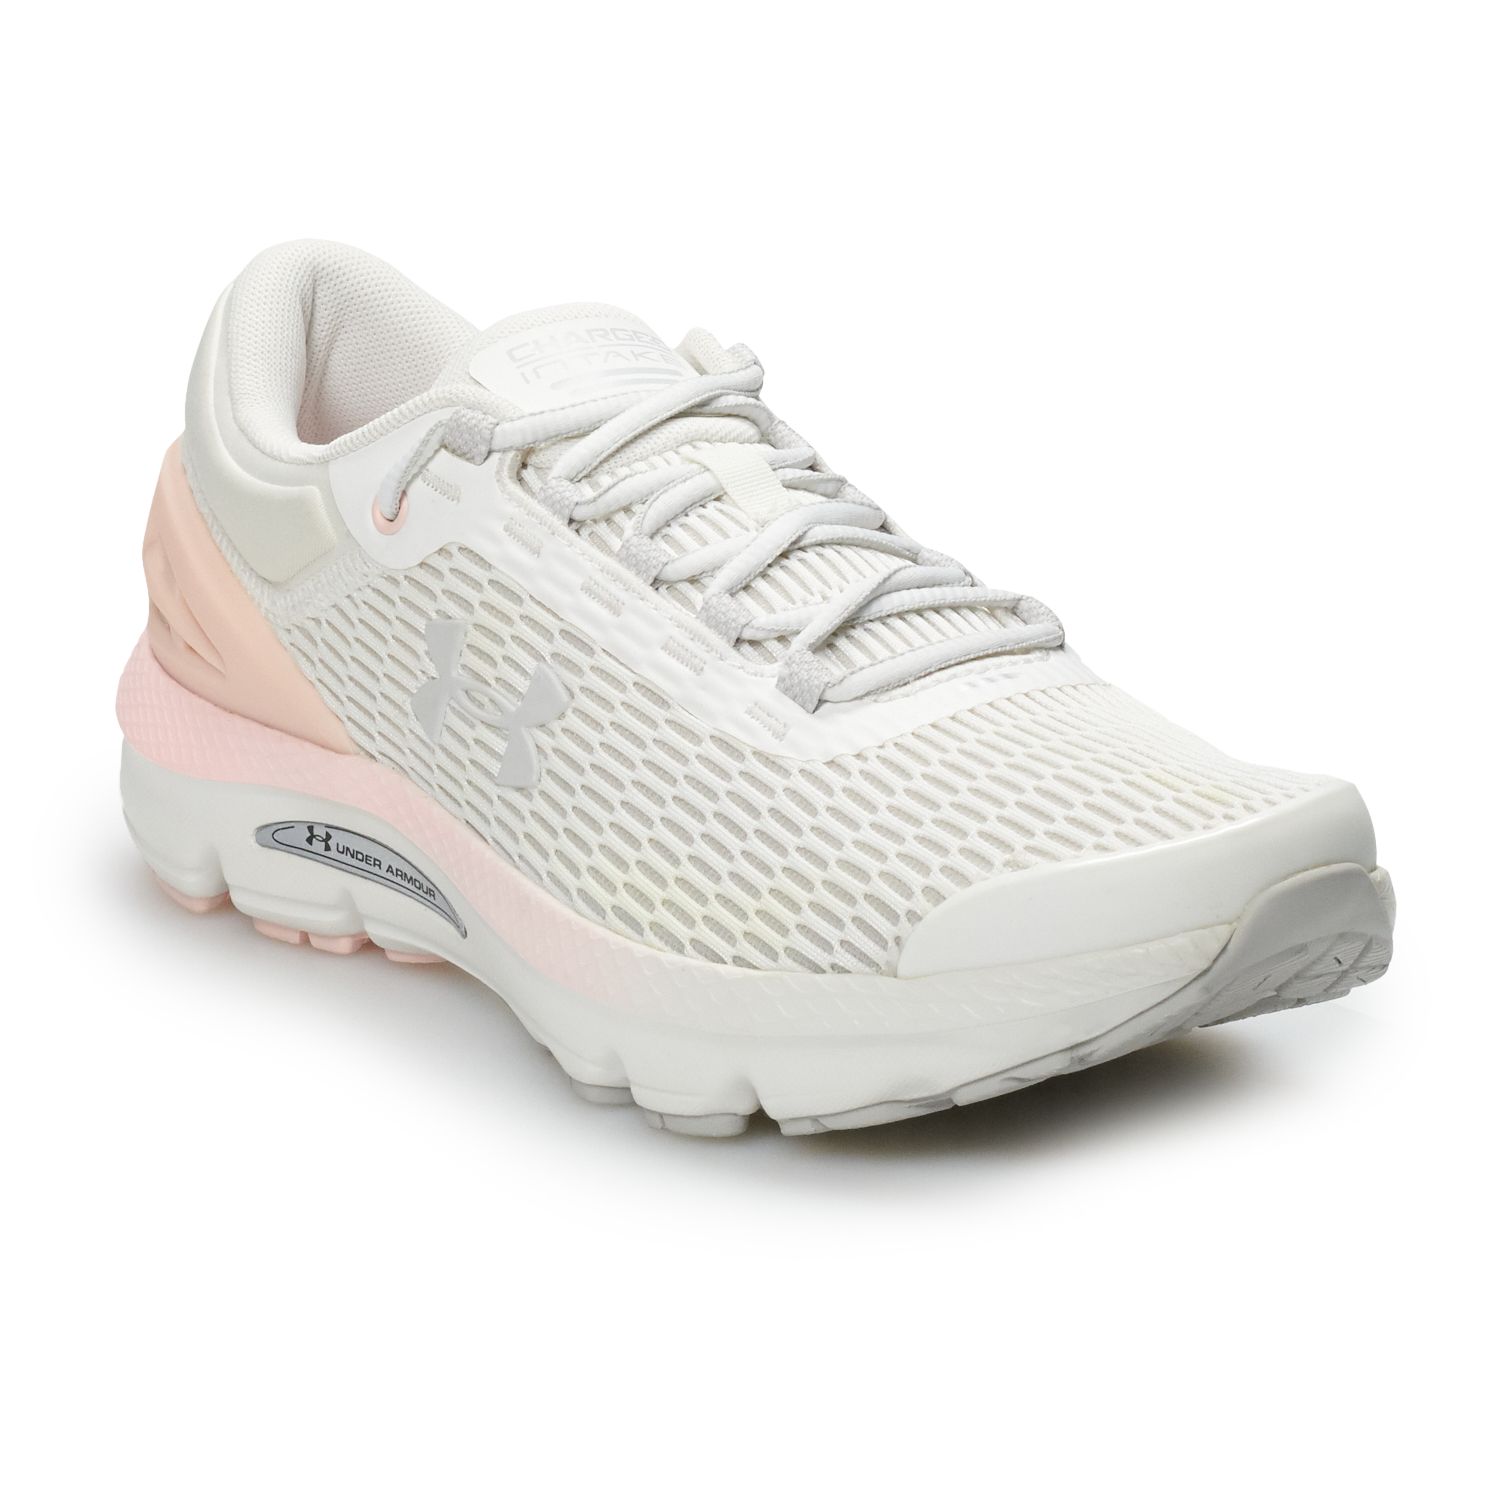 under armour charged intake 3 women's running shoes